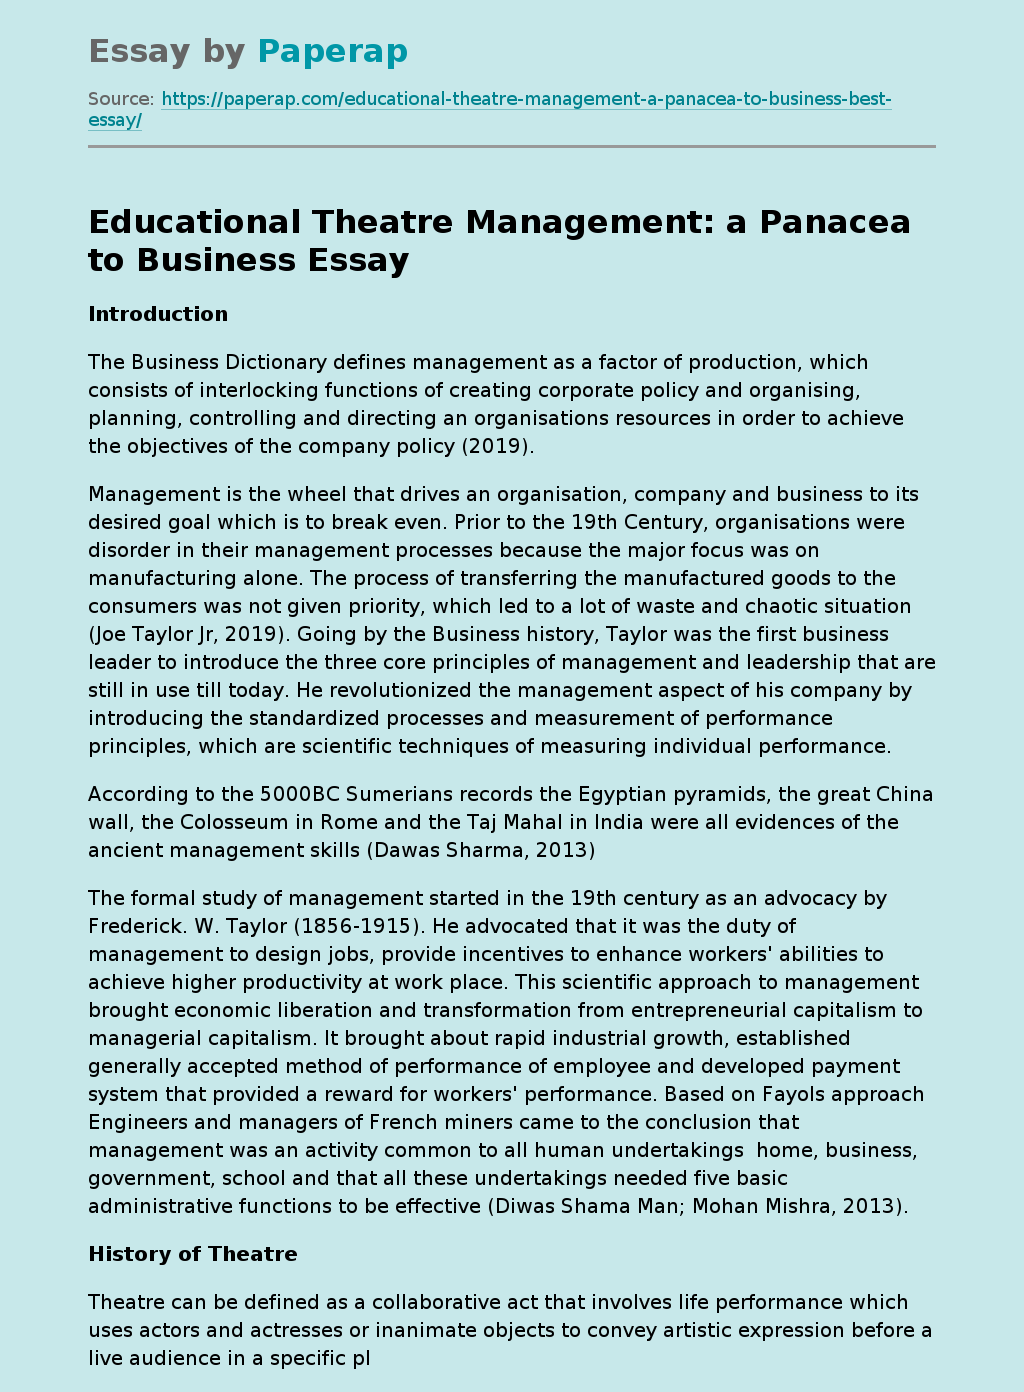 Educational Theatre Management: a Panacea to Business